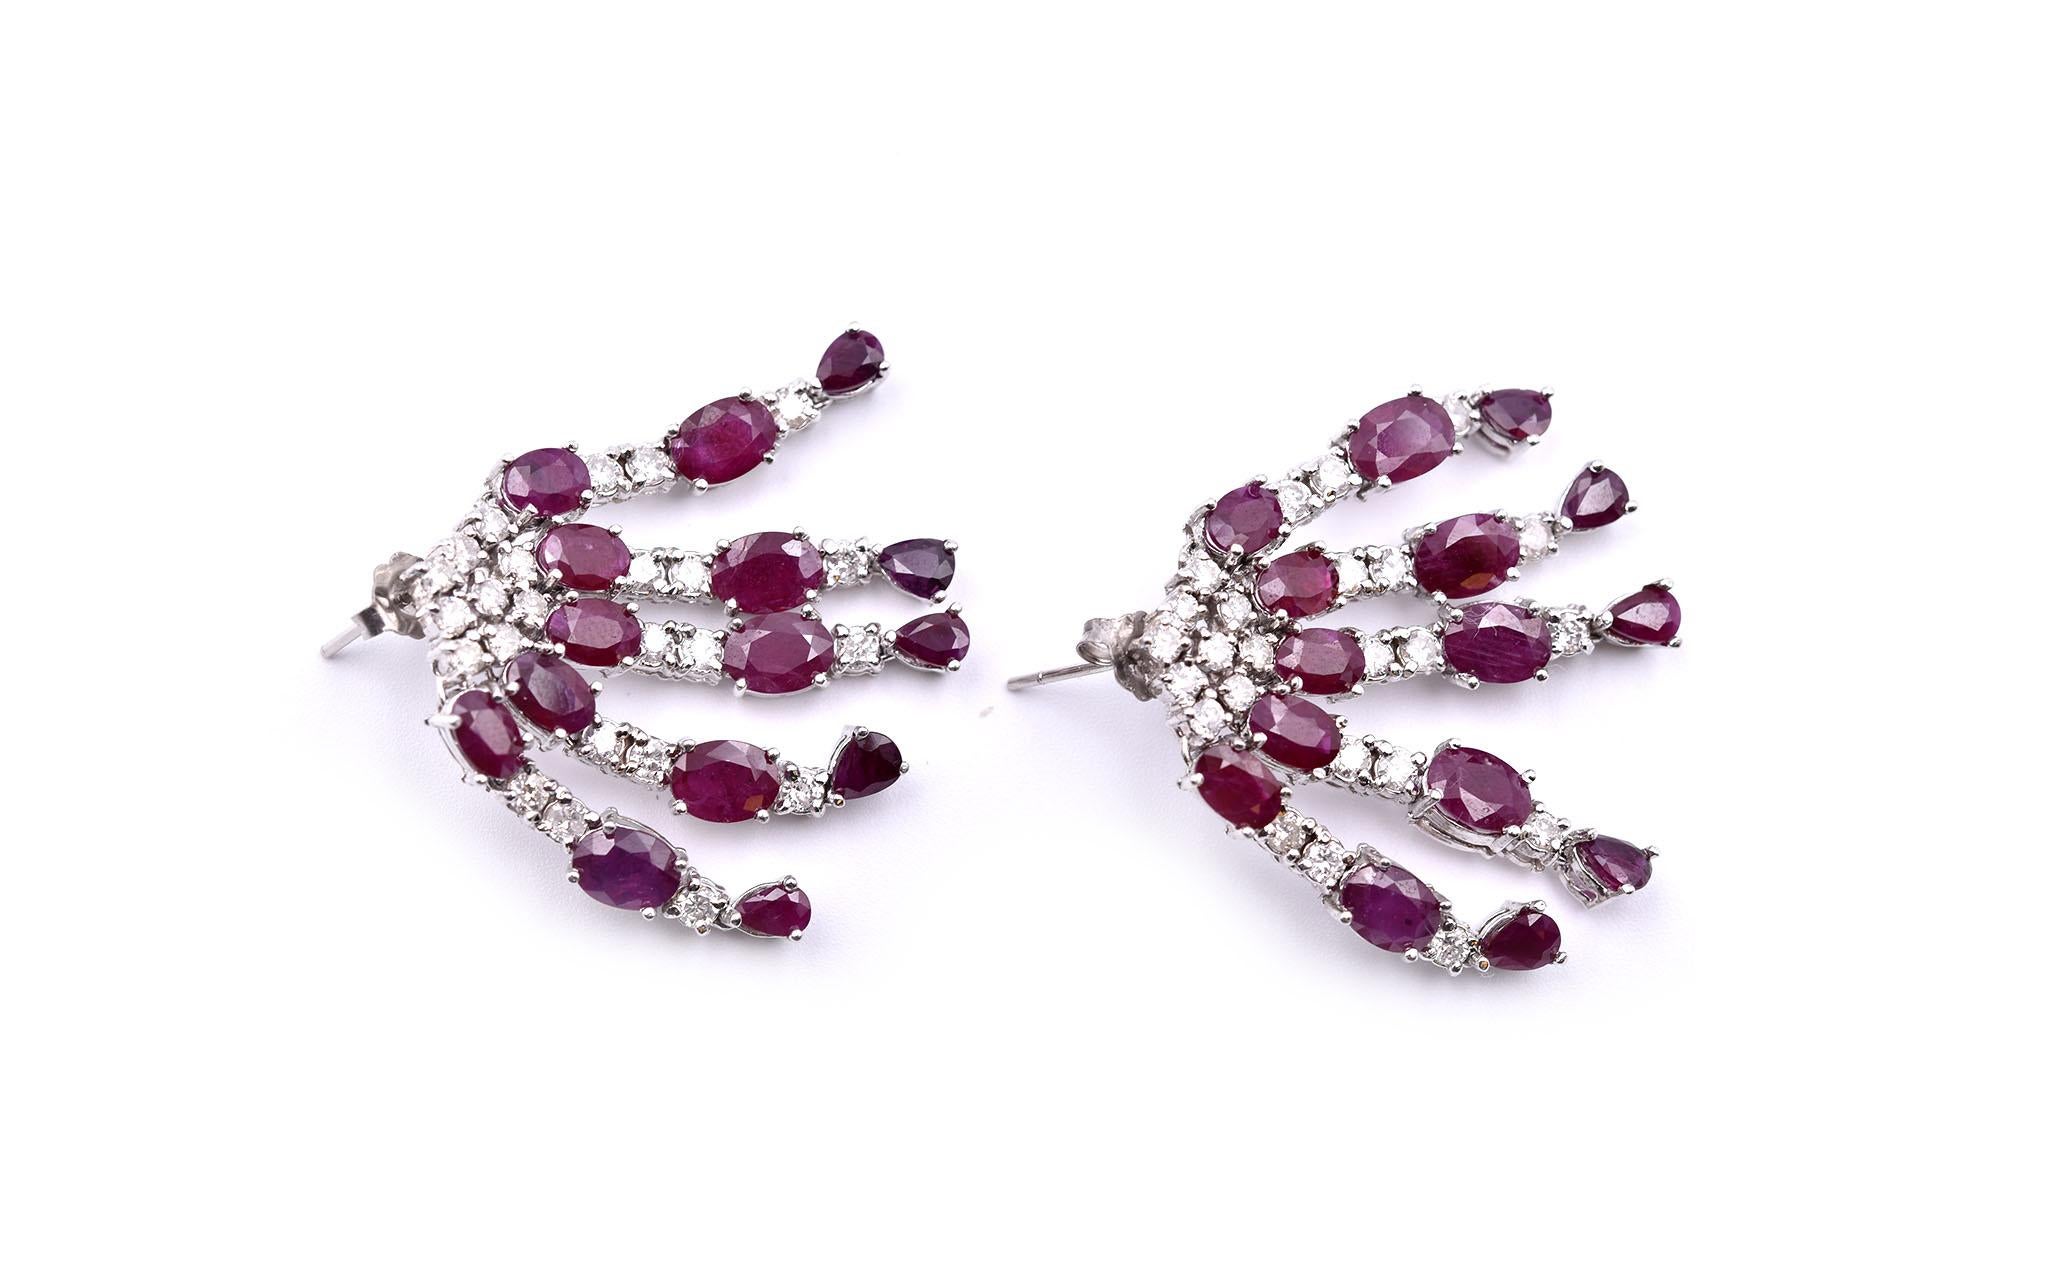 These earrings are crafted in 14k white gold. They feature five rows of diamonds and rubies hanging from a cluster of diamonds. There are 20 oval rubies and 10 pear rubies which have a total weight of 12.50cts, and 33 round diamonds which have a